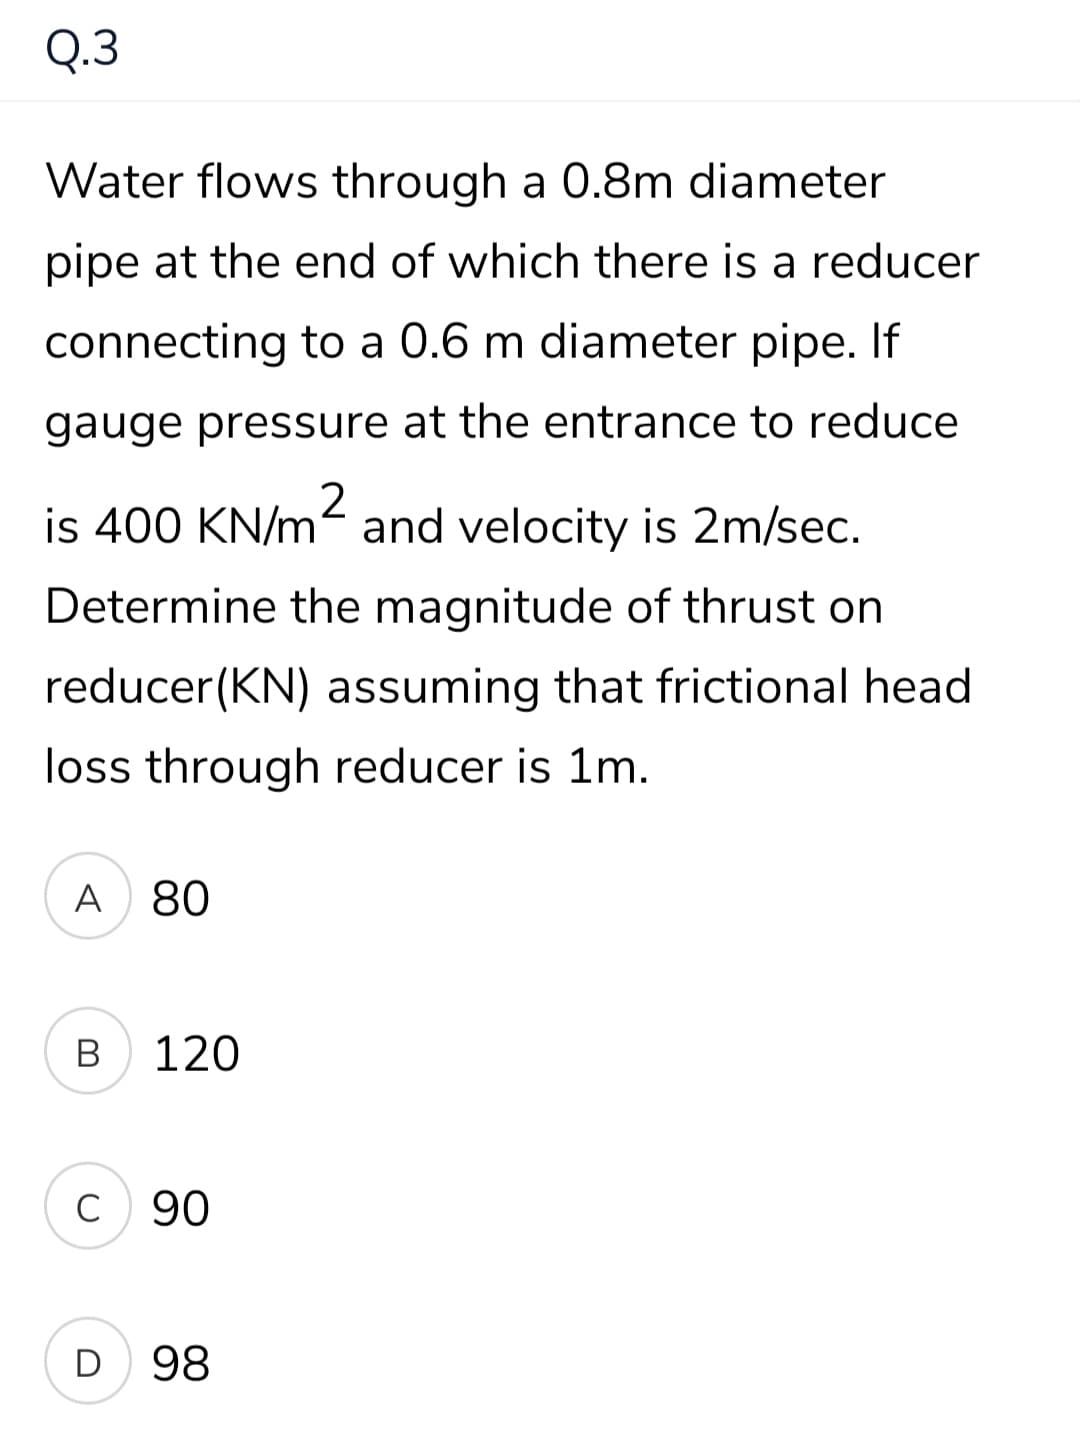 Q.3
Water flows through a 0.8m diameter
pipe at the end of which there is a reducer
connecting to a 0.6 m diameter pipe. If
gauge pressure at the entrance to reduce
is 400 KN/m- and velocity is 2m/sec.
Determine the magnitude of thrust on
reducer(KN) assuming that frictional head
loss through reducer is 1m.
A
80
В
120
C
90
D
98
